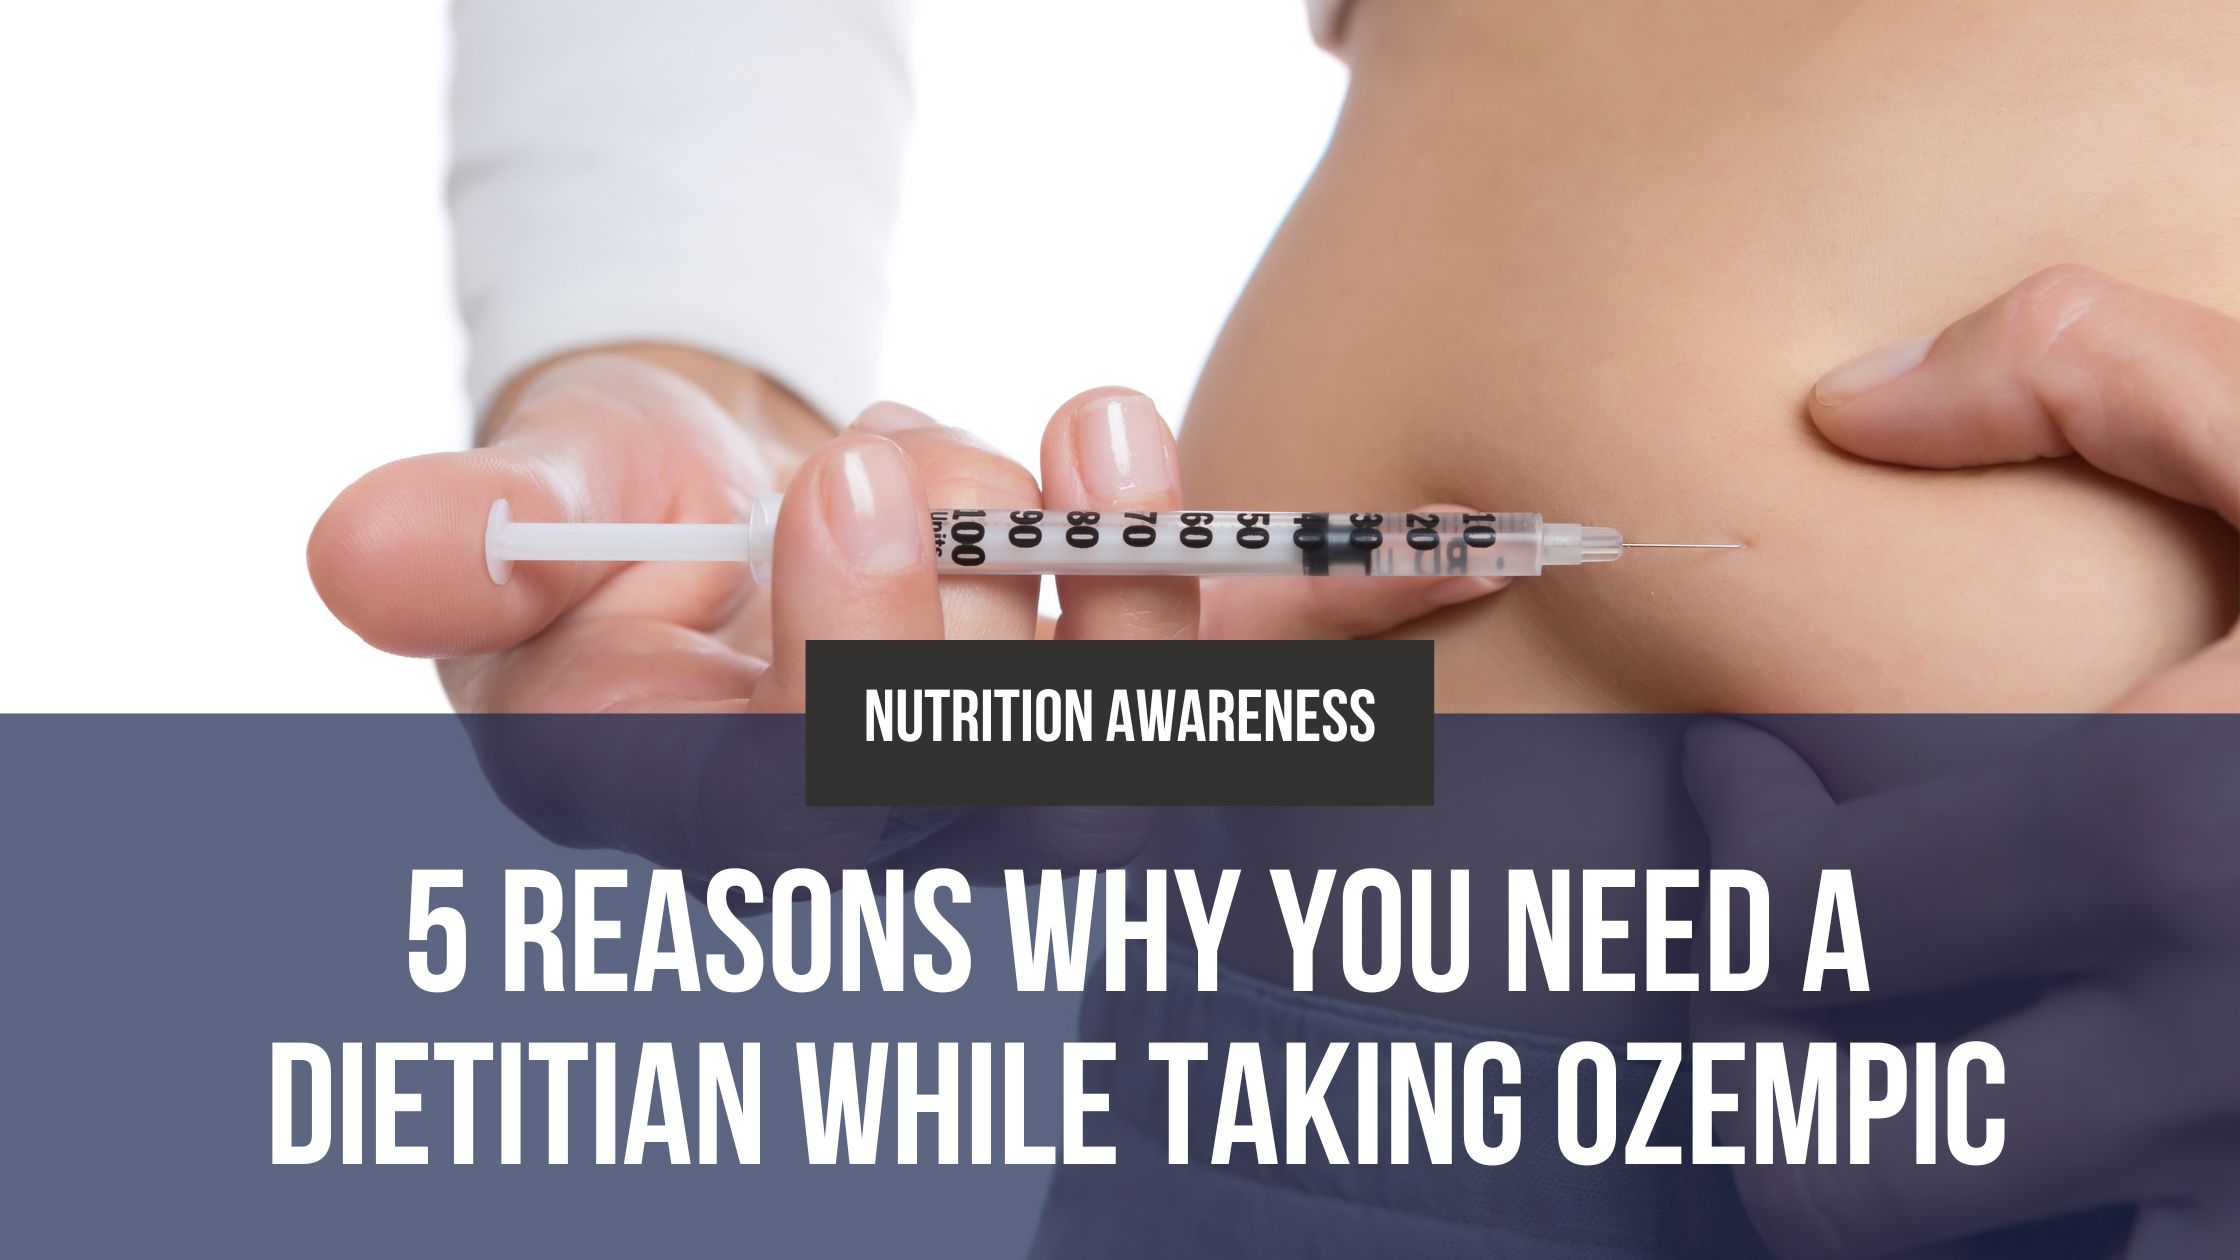 5 Reasons Why You Need a Dietitian While Taking Ozempic 